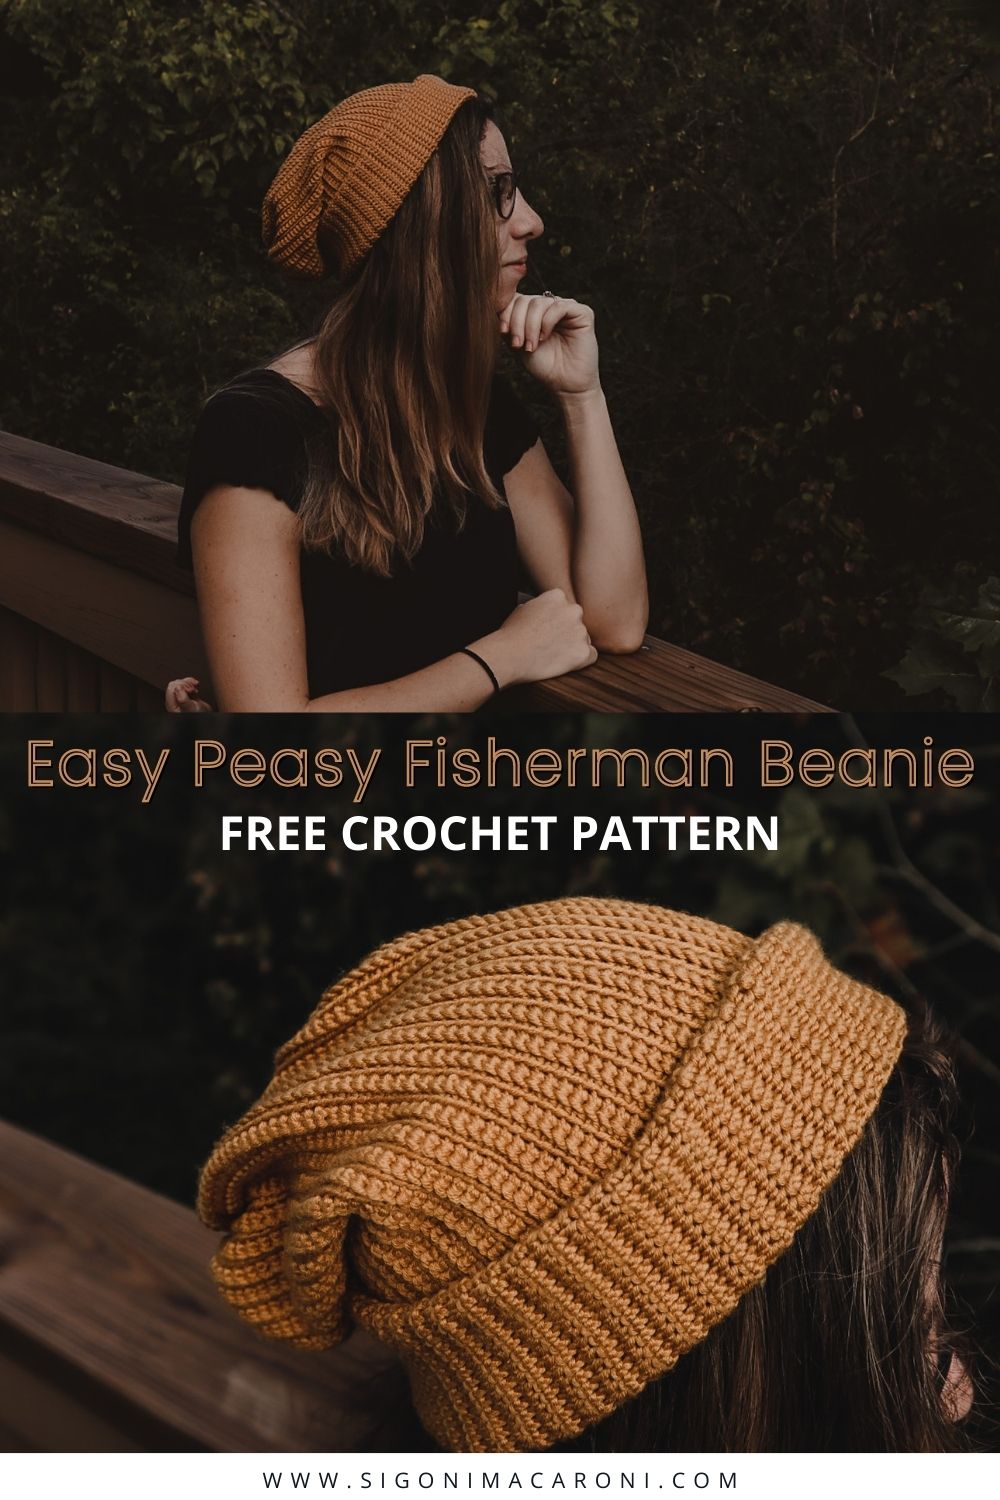 The Easy Peasy Fisherman Beanie is a free, beginner friendly crochet pattern that only uses single crochet stitches. It is simple, yet slouchy and modern. You will also learn how to crochet a hat out of a rectangle! This crochet beanie pattern is unisex, but I do think it would be a great mens gift. I hope you love this free crochet pattern for the Easy Peasy Fisherman Beanie! via @sigonimacaronii